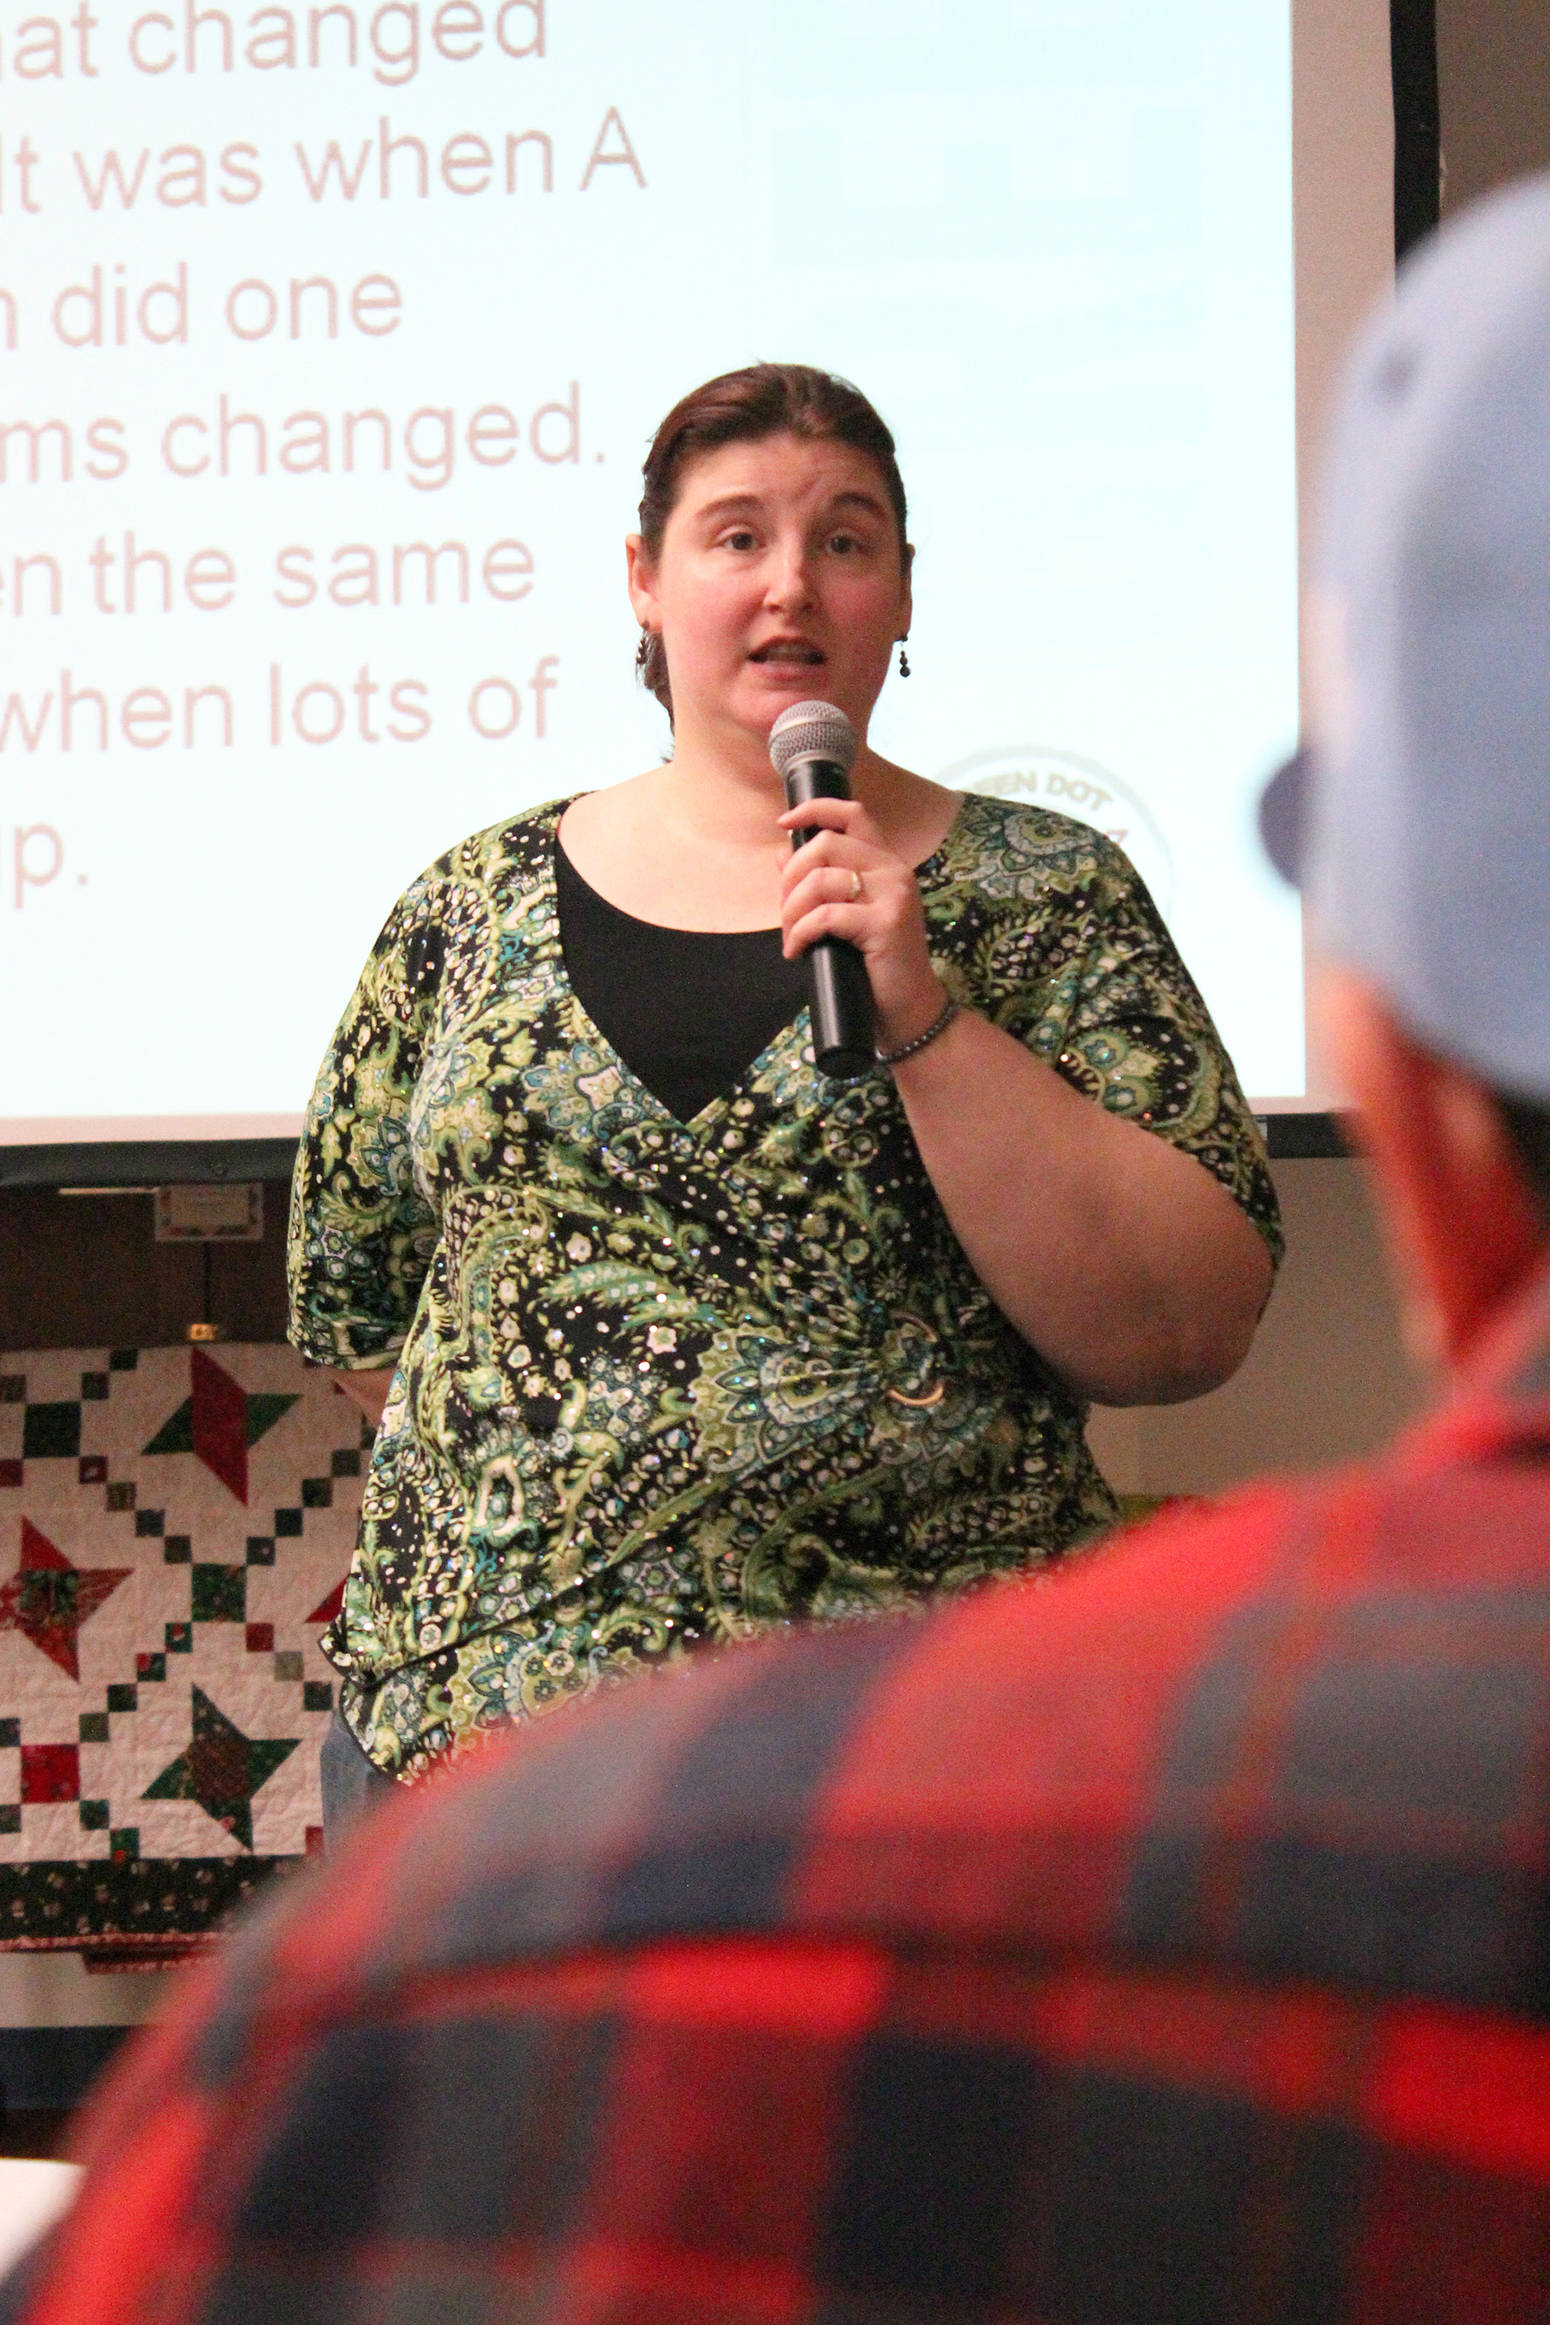 Ashley Blatchford of the LeeShore Center speaks to an audience about the Green Dot program during this year’s Alaskans Choose Respect march and event Thursday, March 30, 2017 at the Kenai Chamber of Commerce and Visitor Center in Kenai, Alaska. (Megan Pacer/Peninsula Clarion)